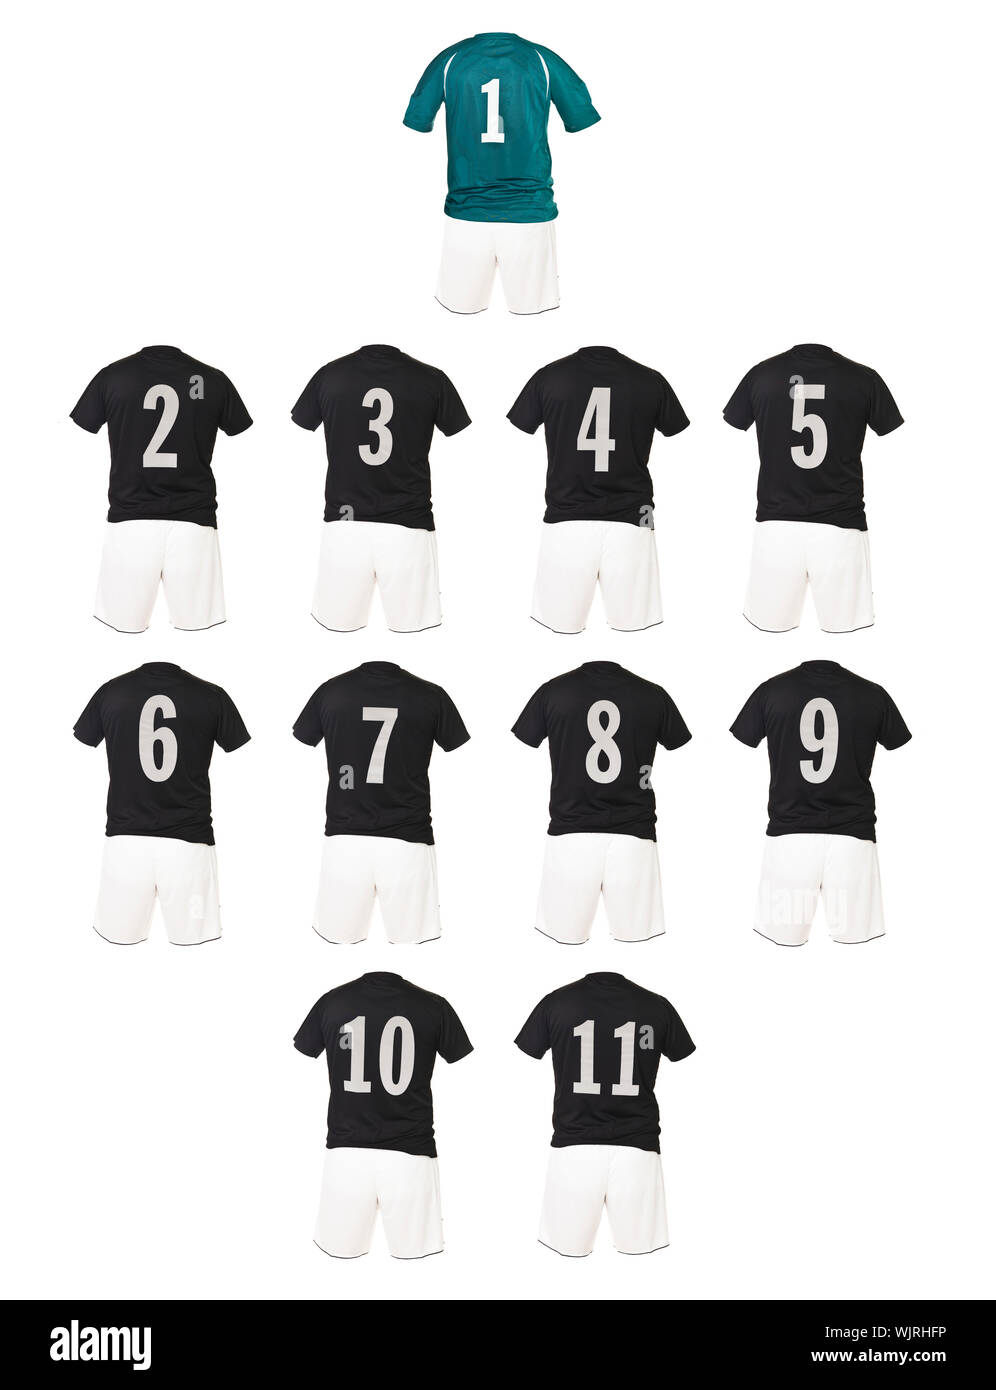 Football shirt with number 3 Stock Photo - Alamy